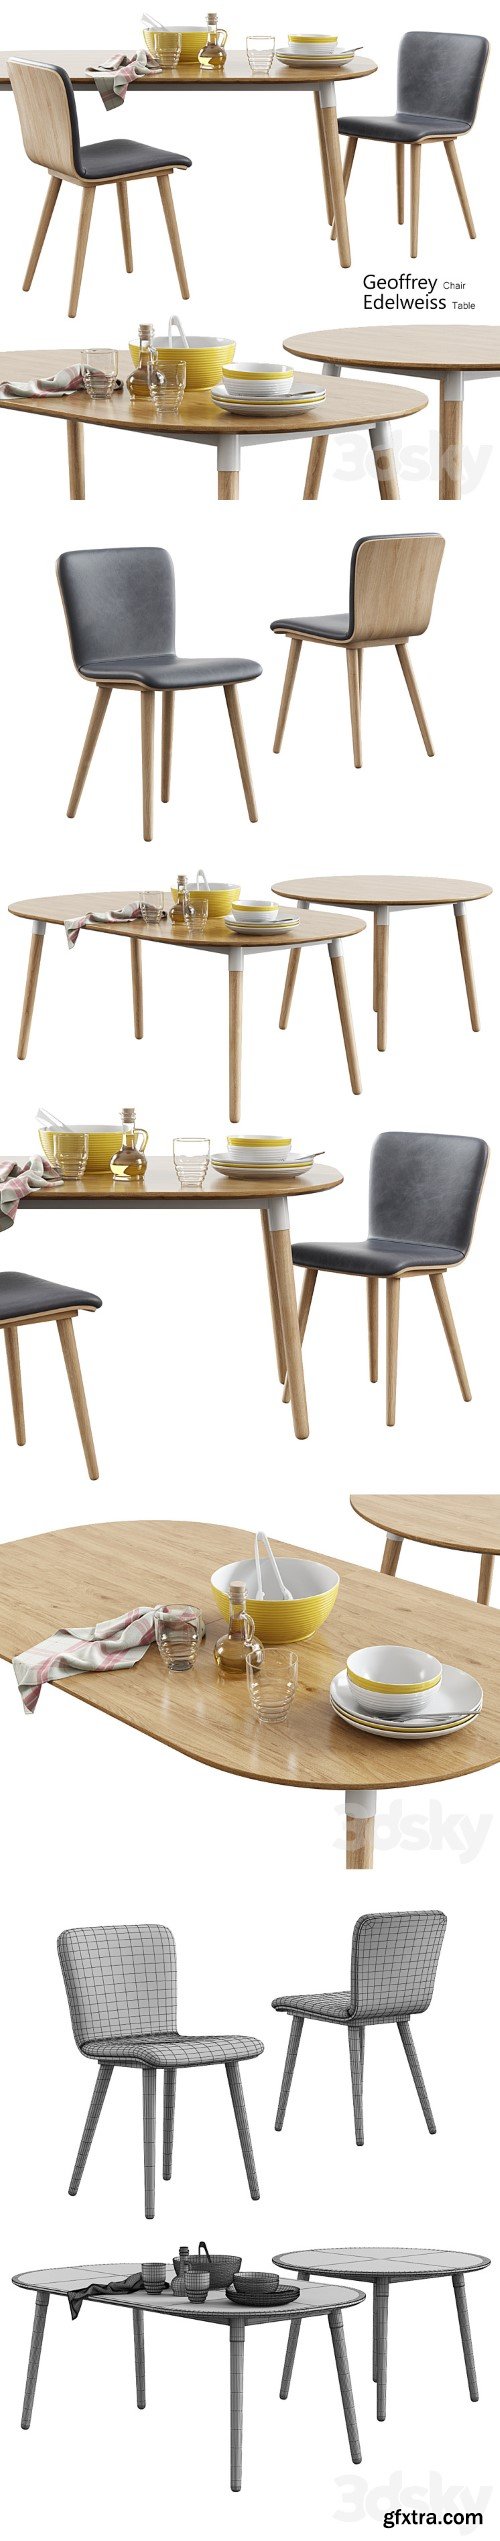 Made / Geoffrey Chair + Edelweiss Table